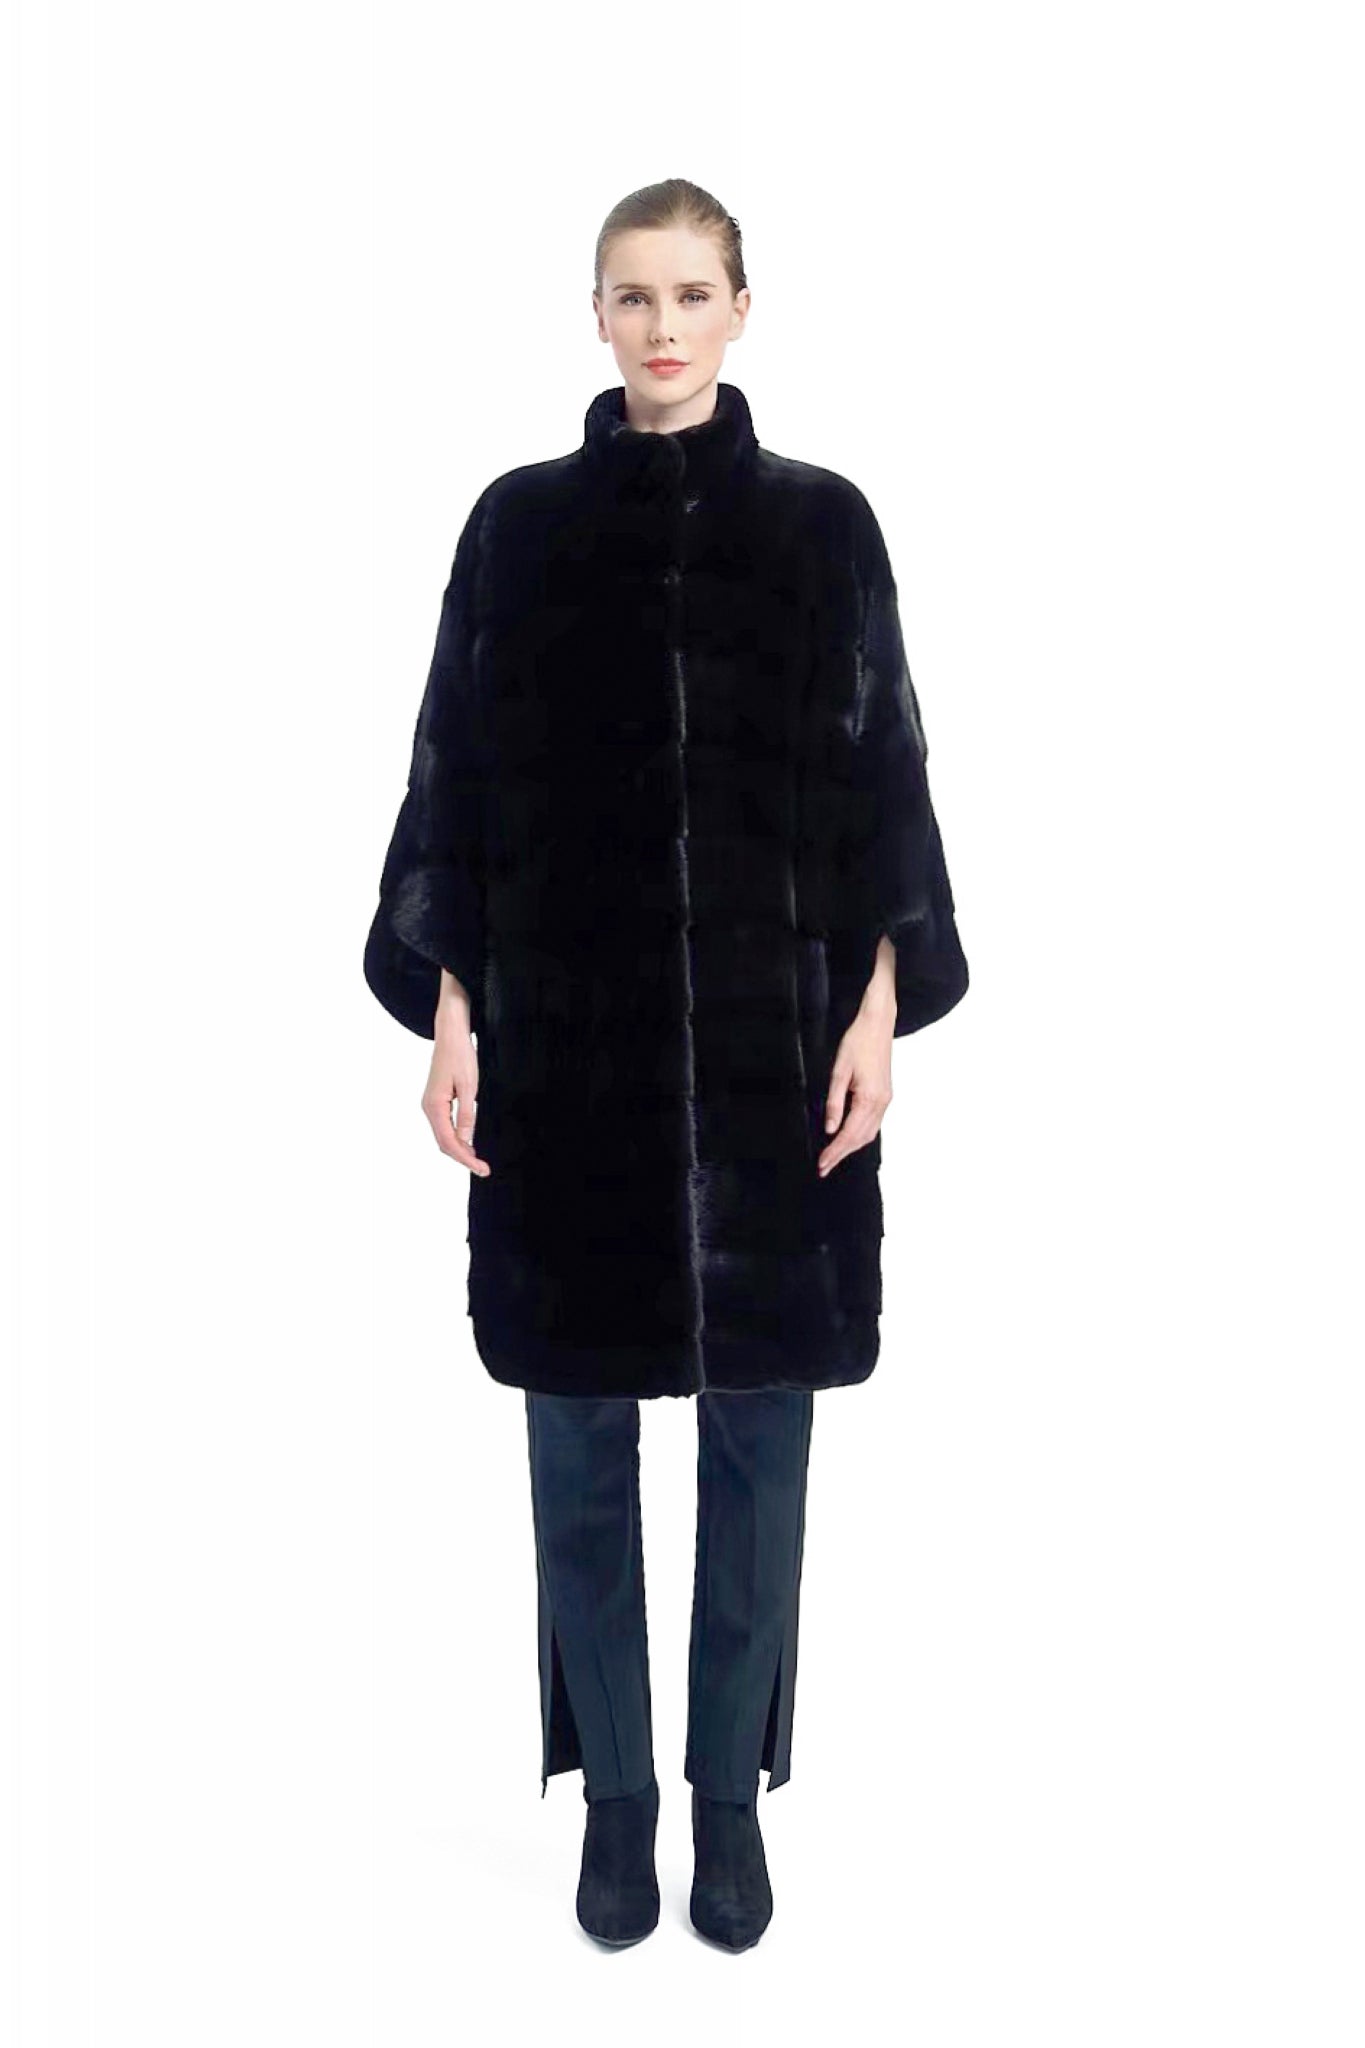 Gorgeous Long Mink Fur Coat - A Must-Have for Winter